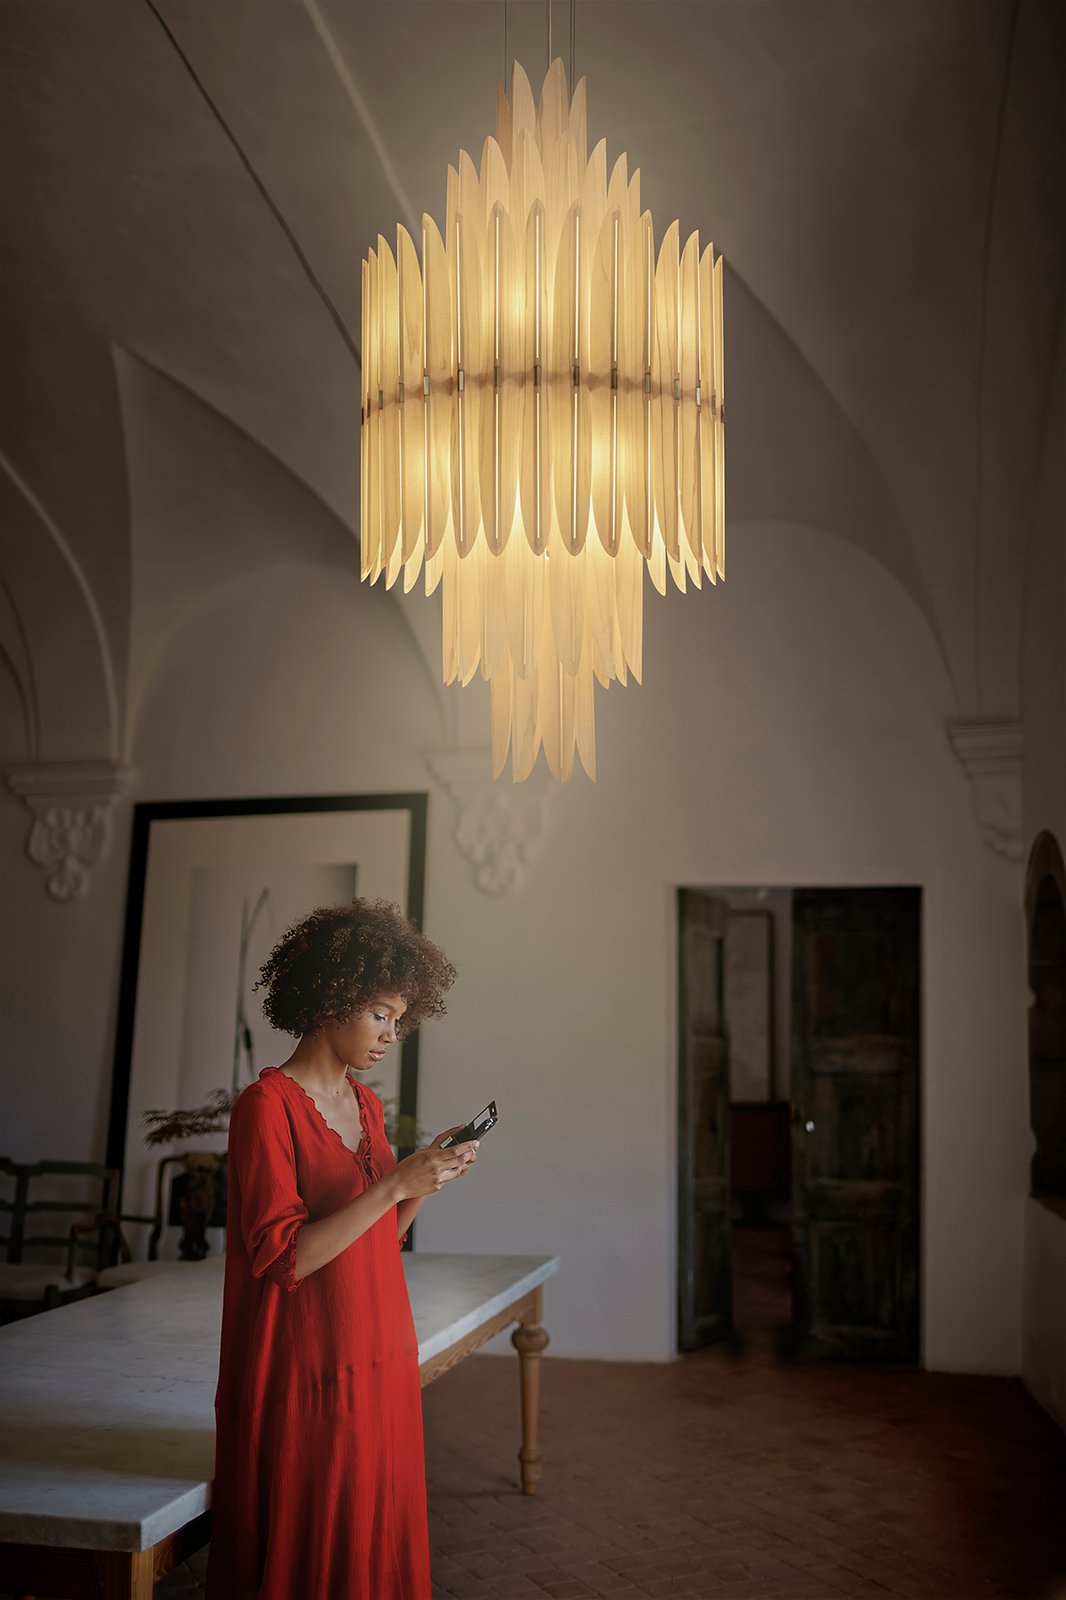 majestic wooden-feather-chandelier-illuminating-a-high-ceilinged-room-by-lzf